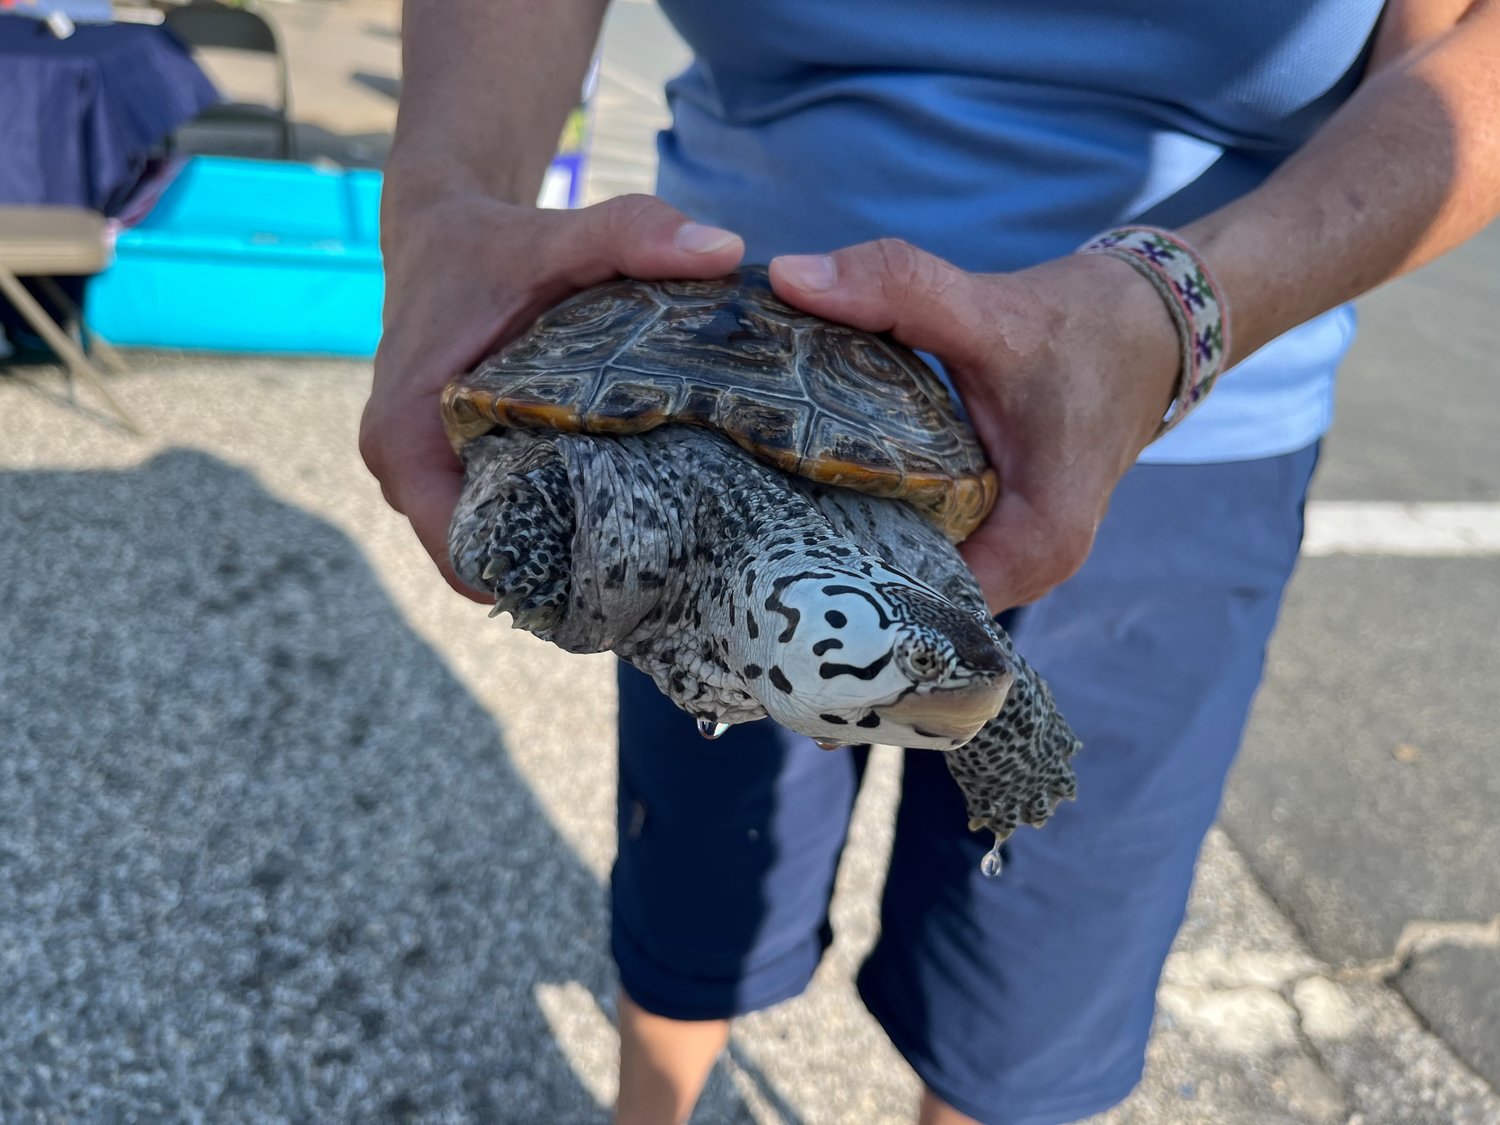 Jasper, a diamondback terrapin, was there as an example of the importance of protecting local wildlife.